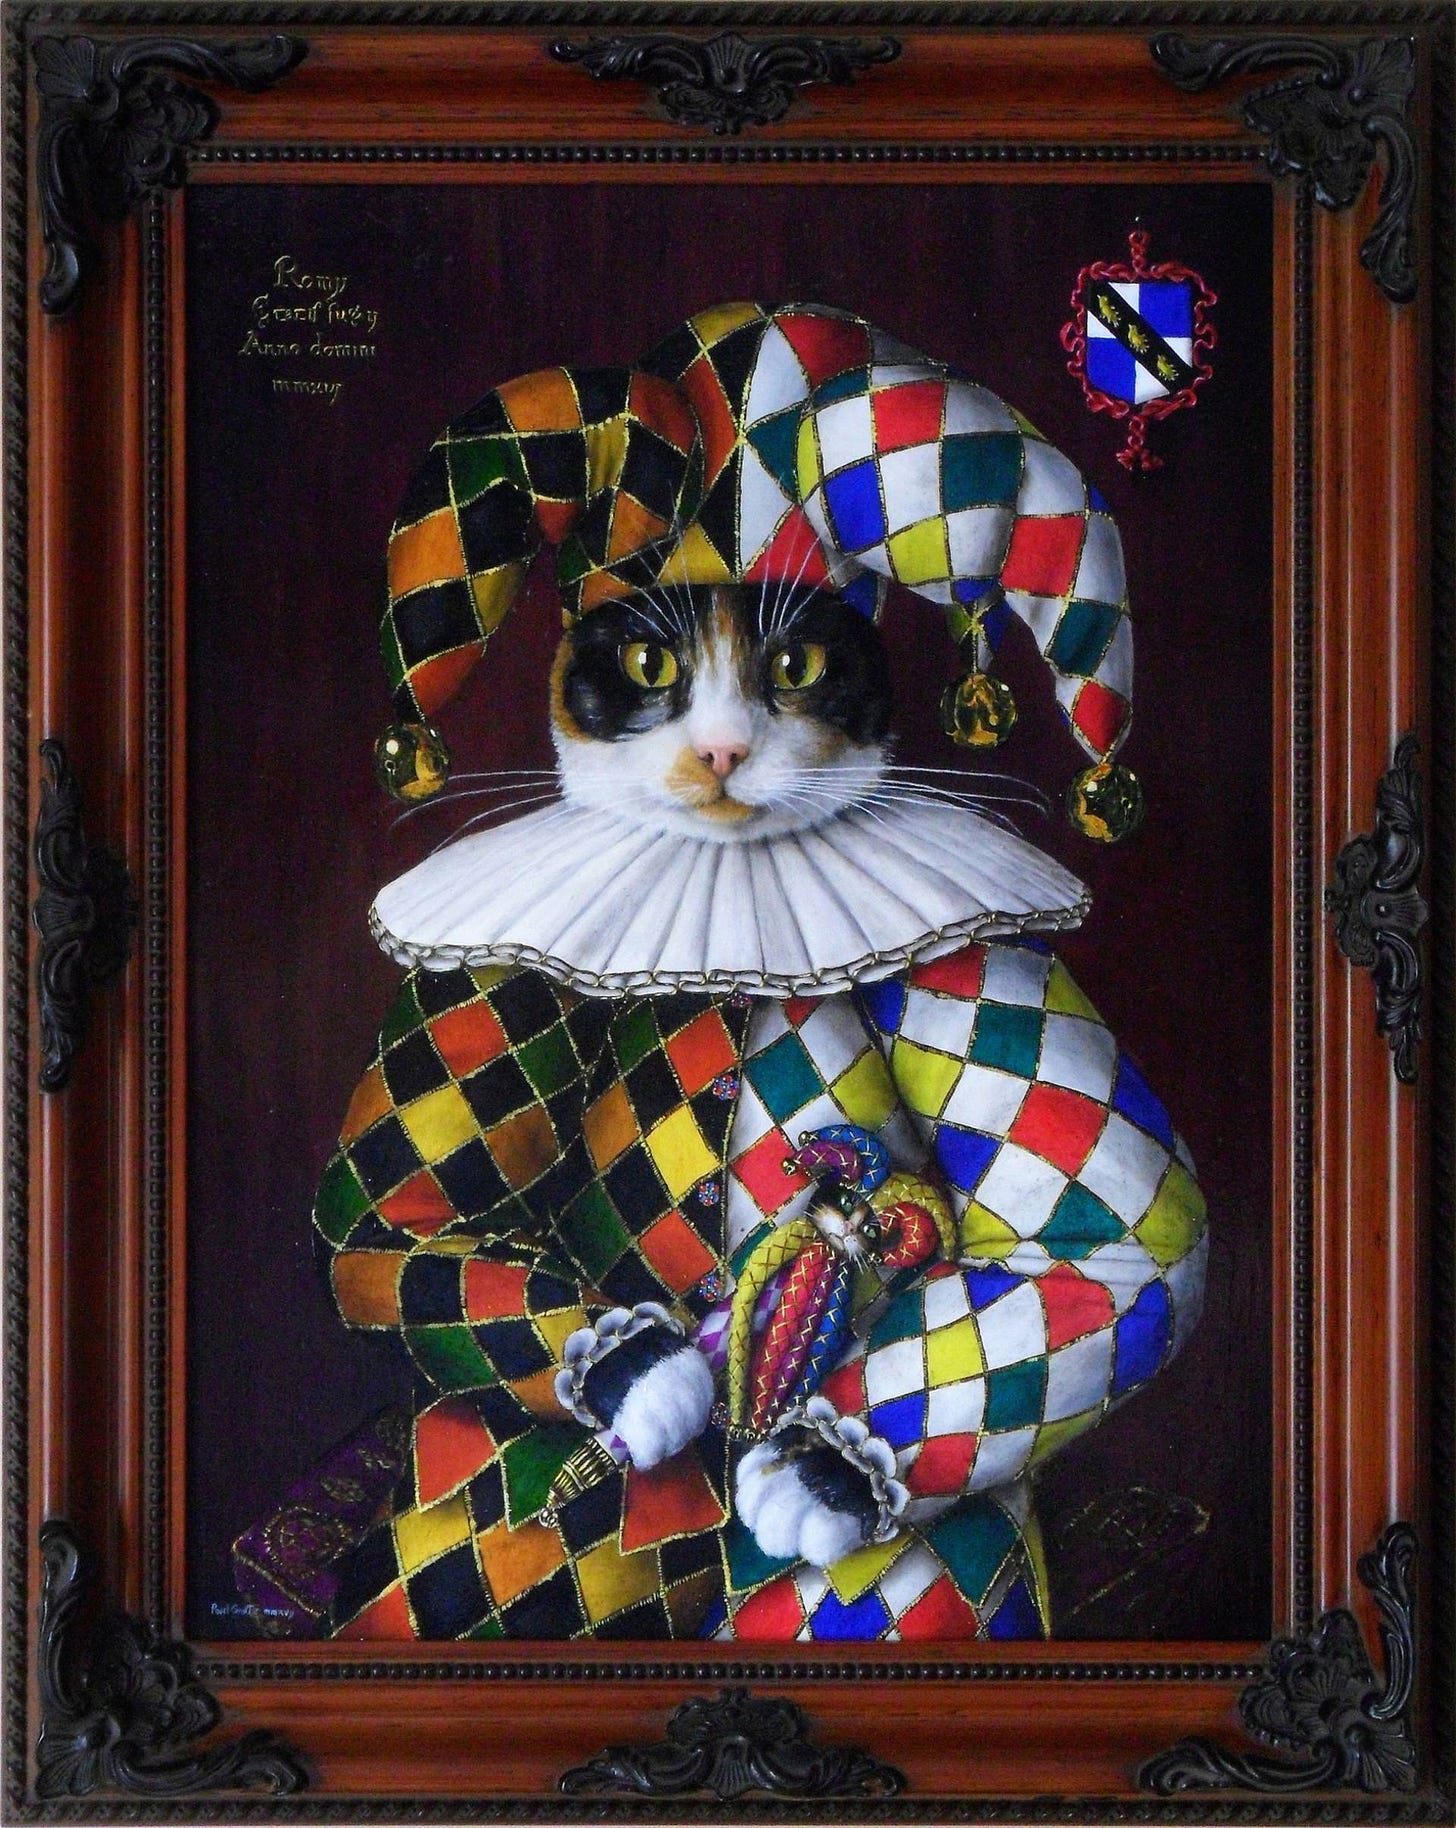 Romy the Elizabethan Jester Painting by Paul Grosse | Saatchi Art